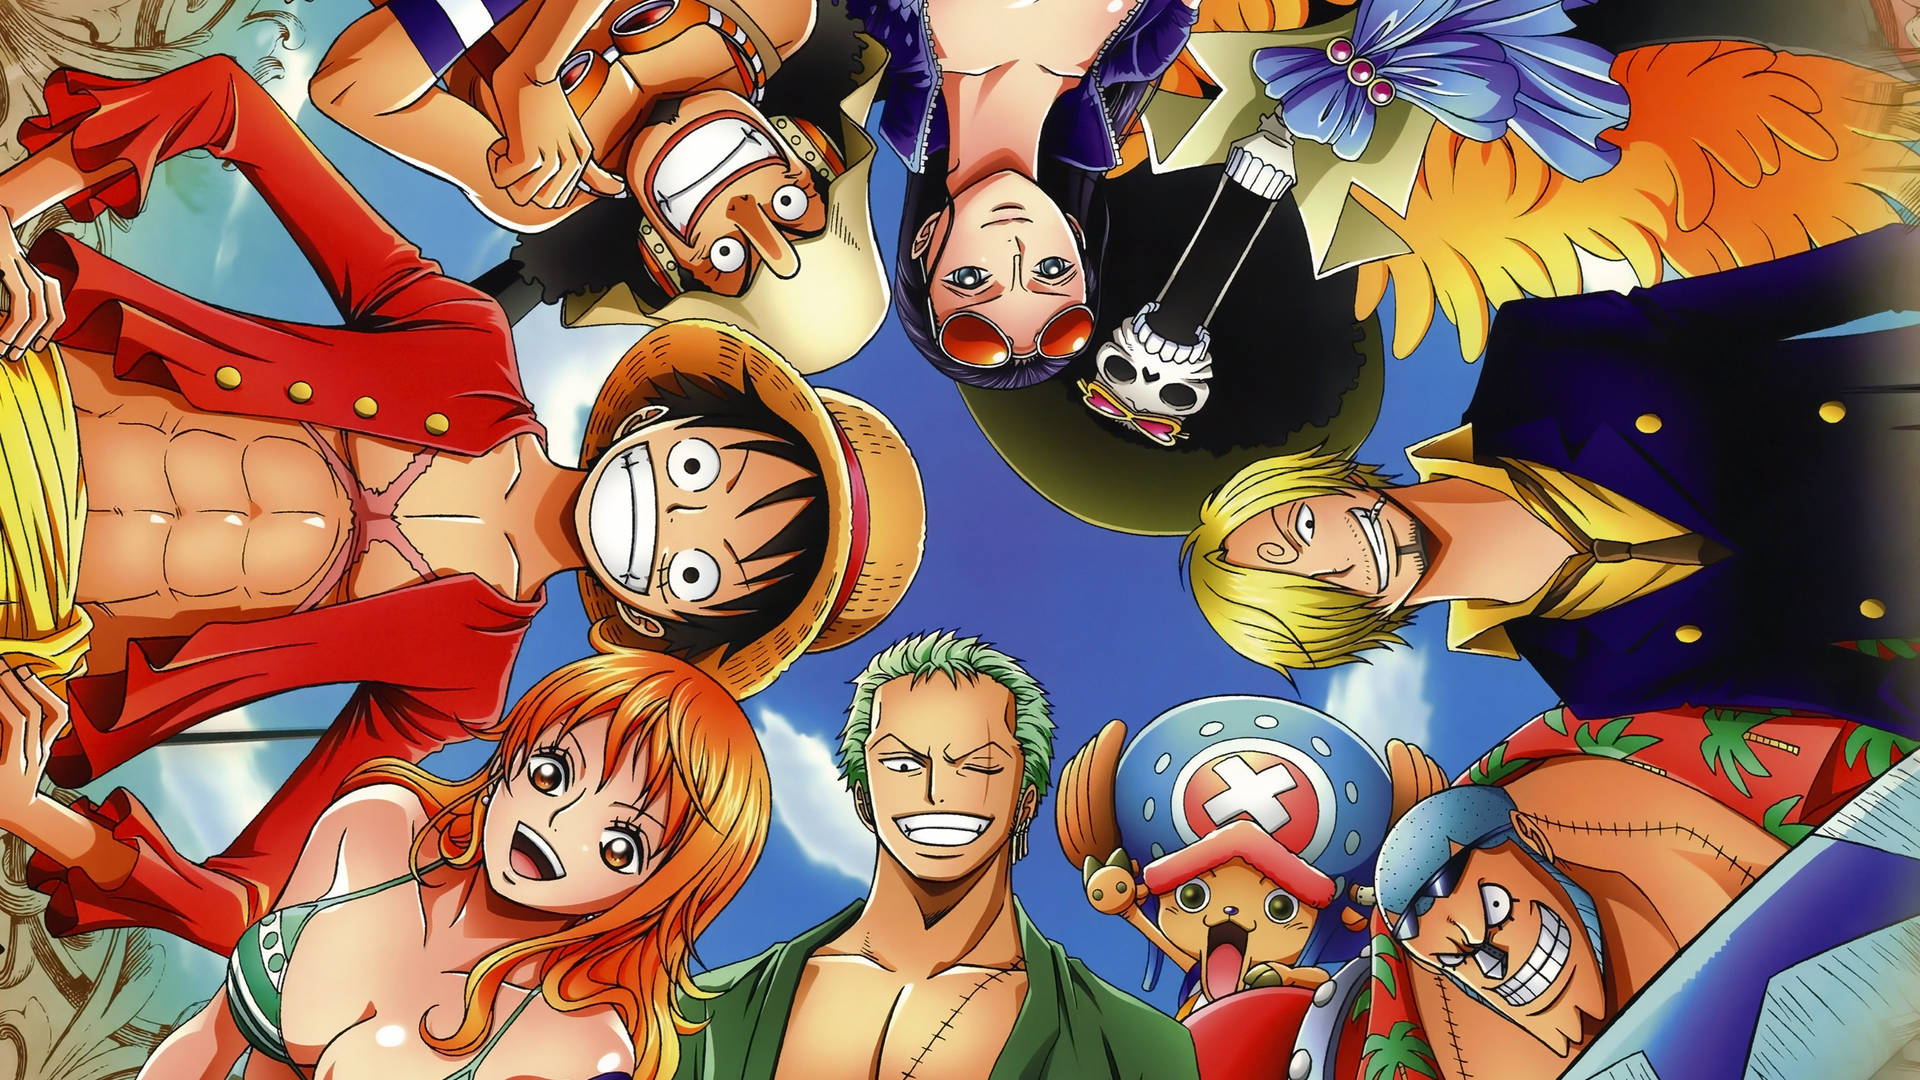 Sanji And The Straw Hat Pirates Set Sail On Their Journey! Background